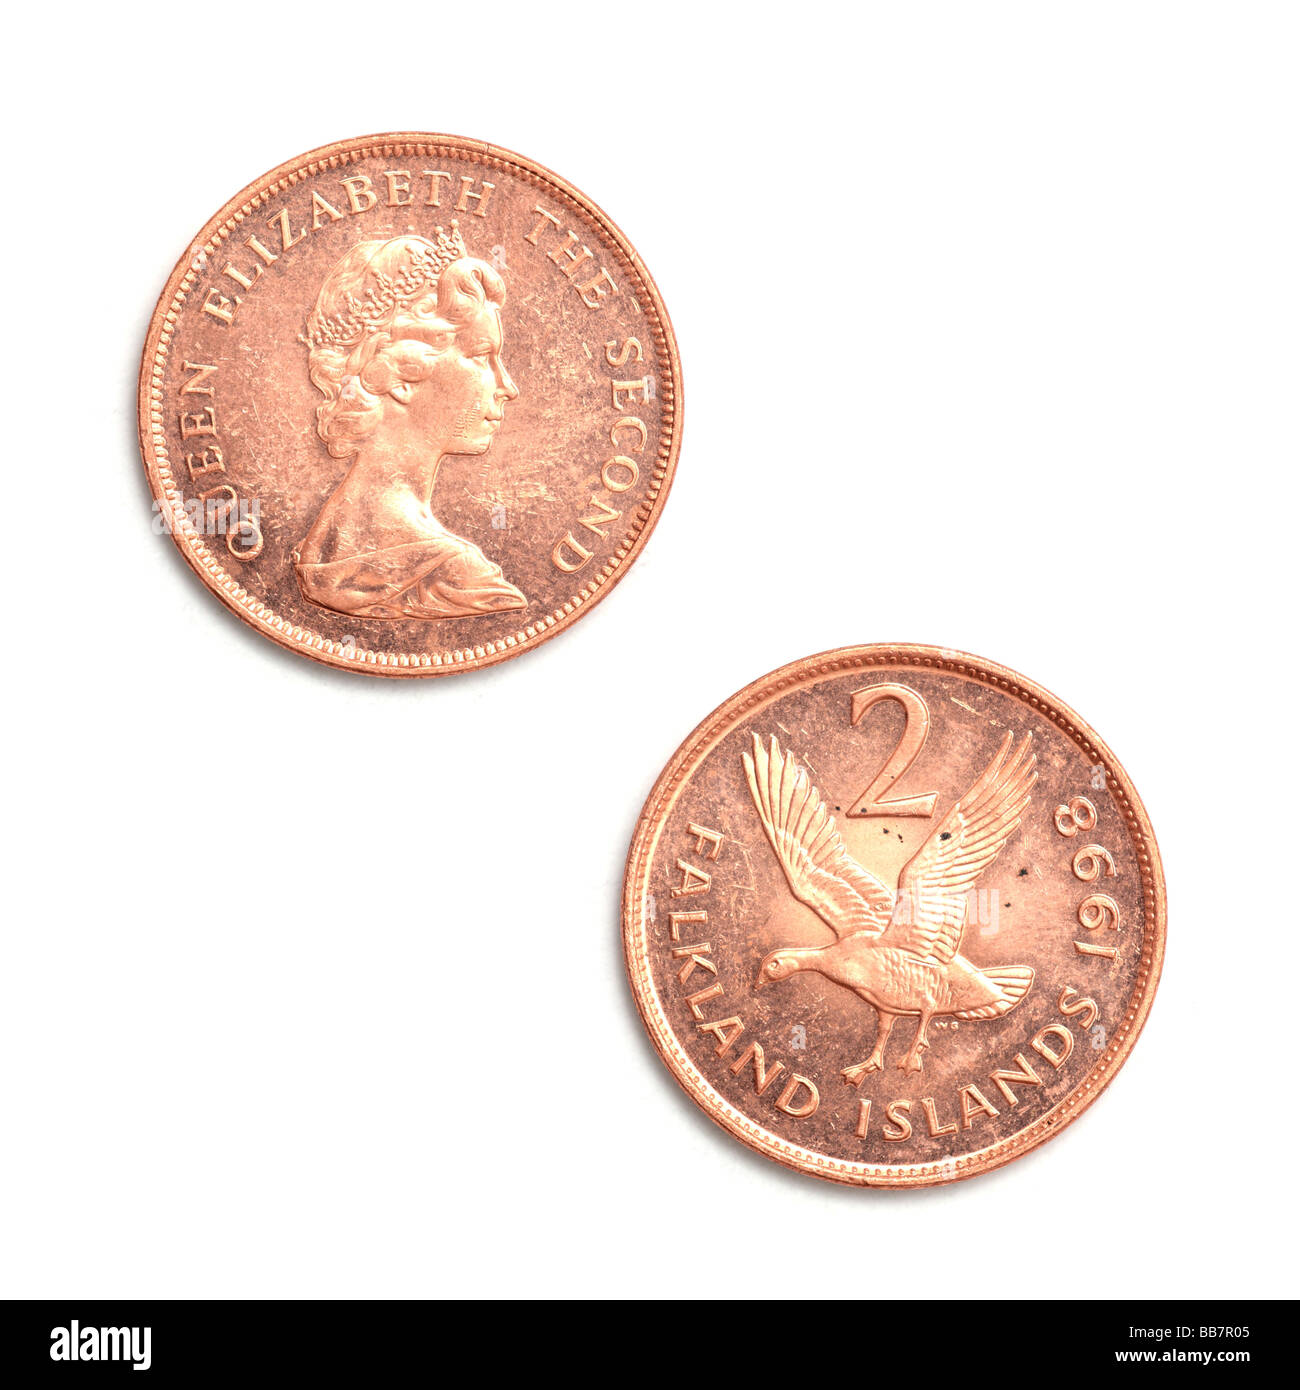 'Falkand Islands two pence coin' Stock Photo